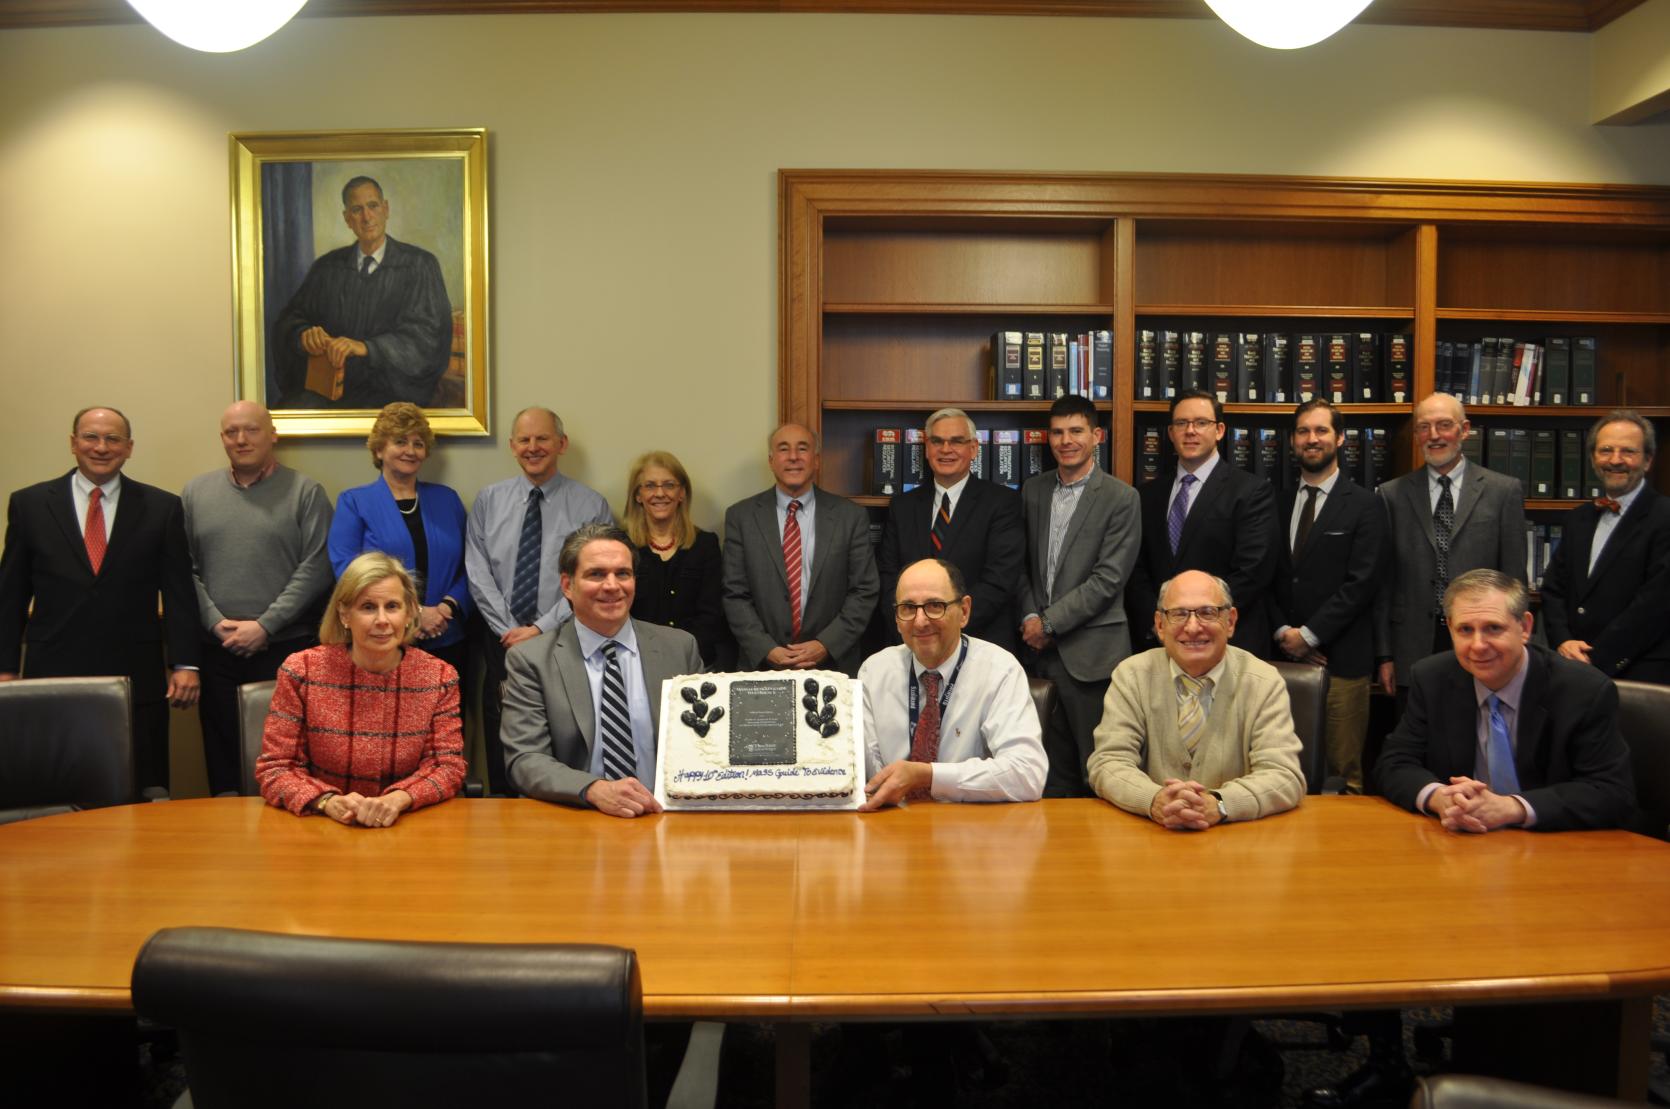 Members of the committee celebrated the publication of the tenth edition of the Massachusetts Guide to Evidenc.